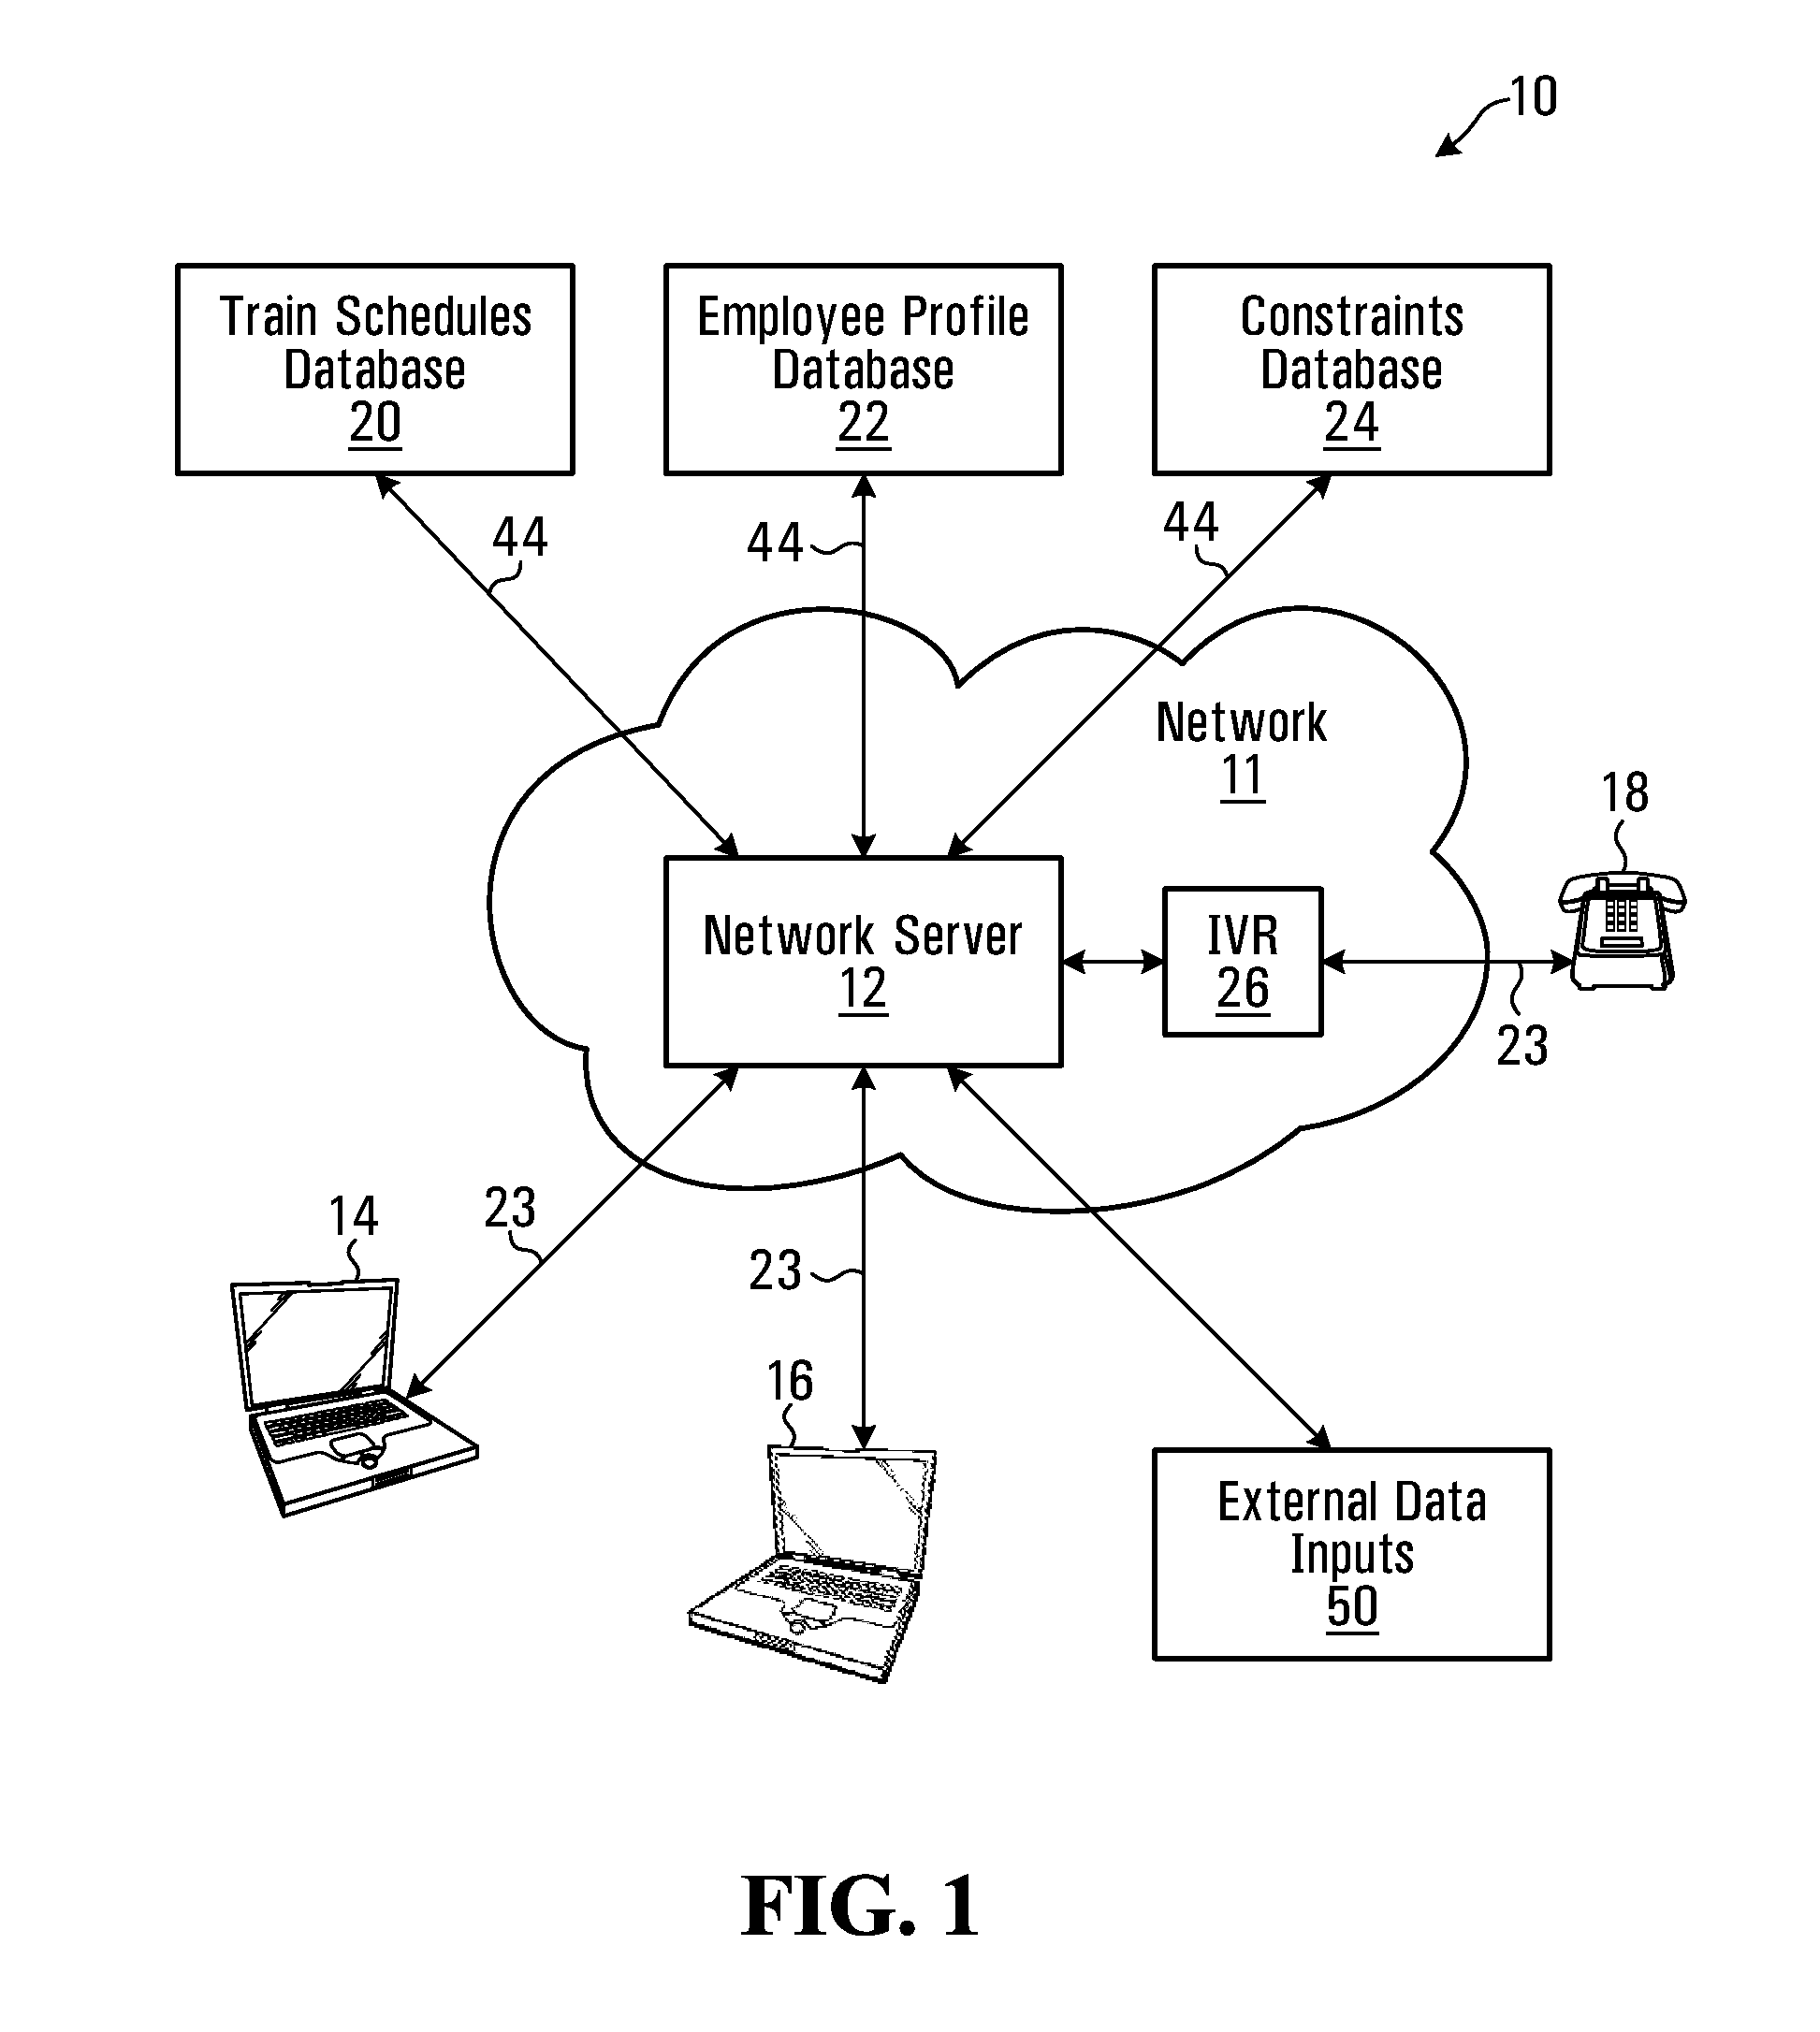 Method and system for enabling a user to bid on a work assignment